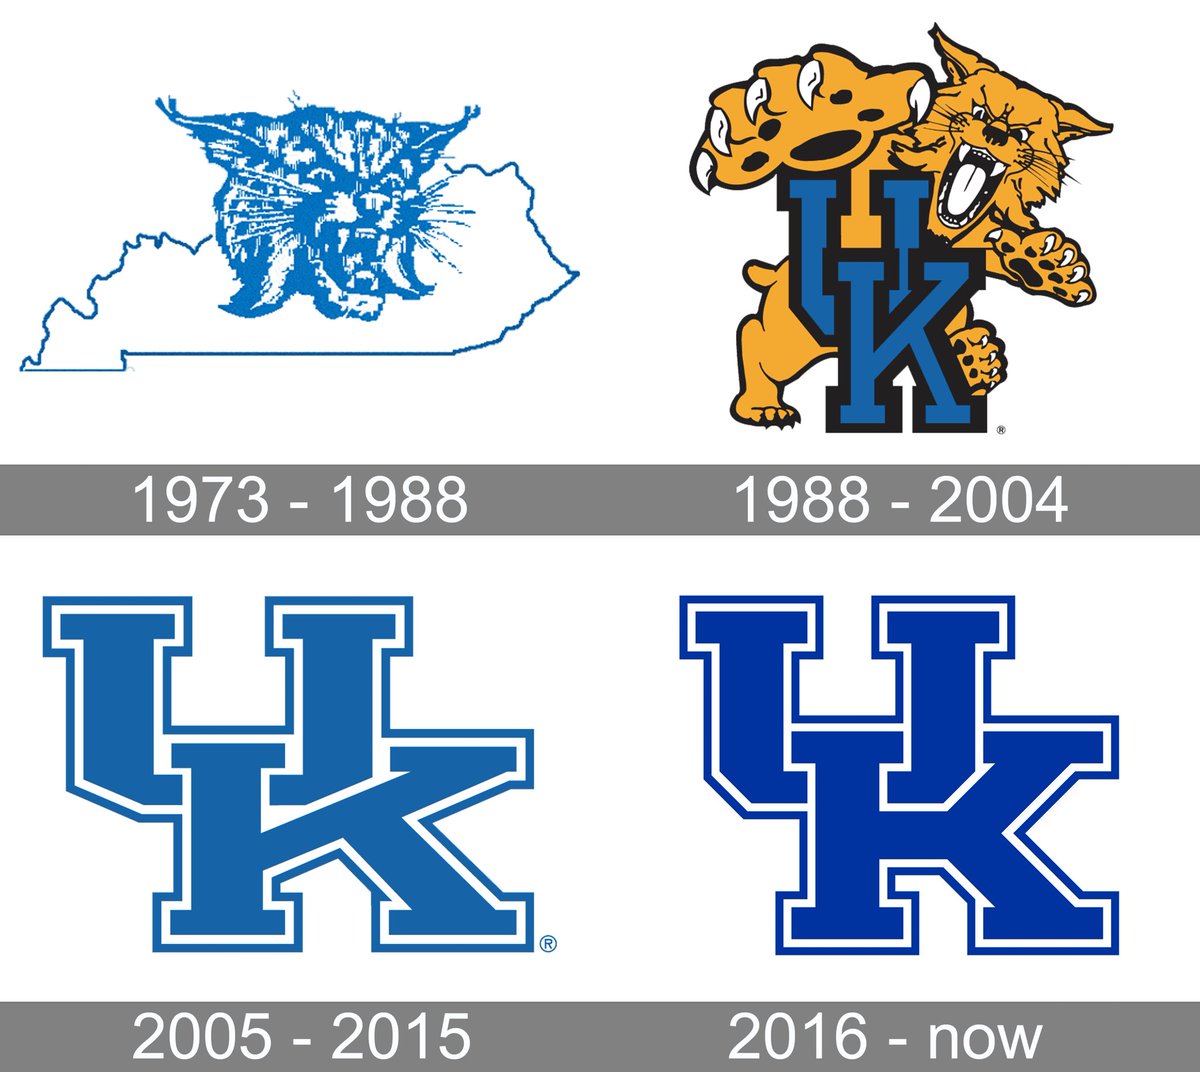 Kentucky really copied Houston’s logo step by step 😭